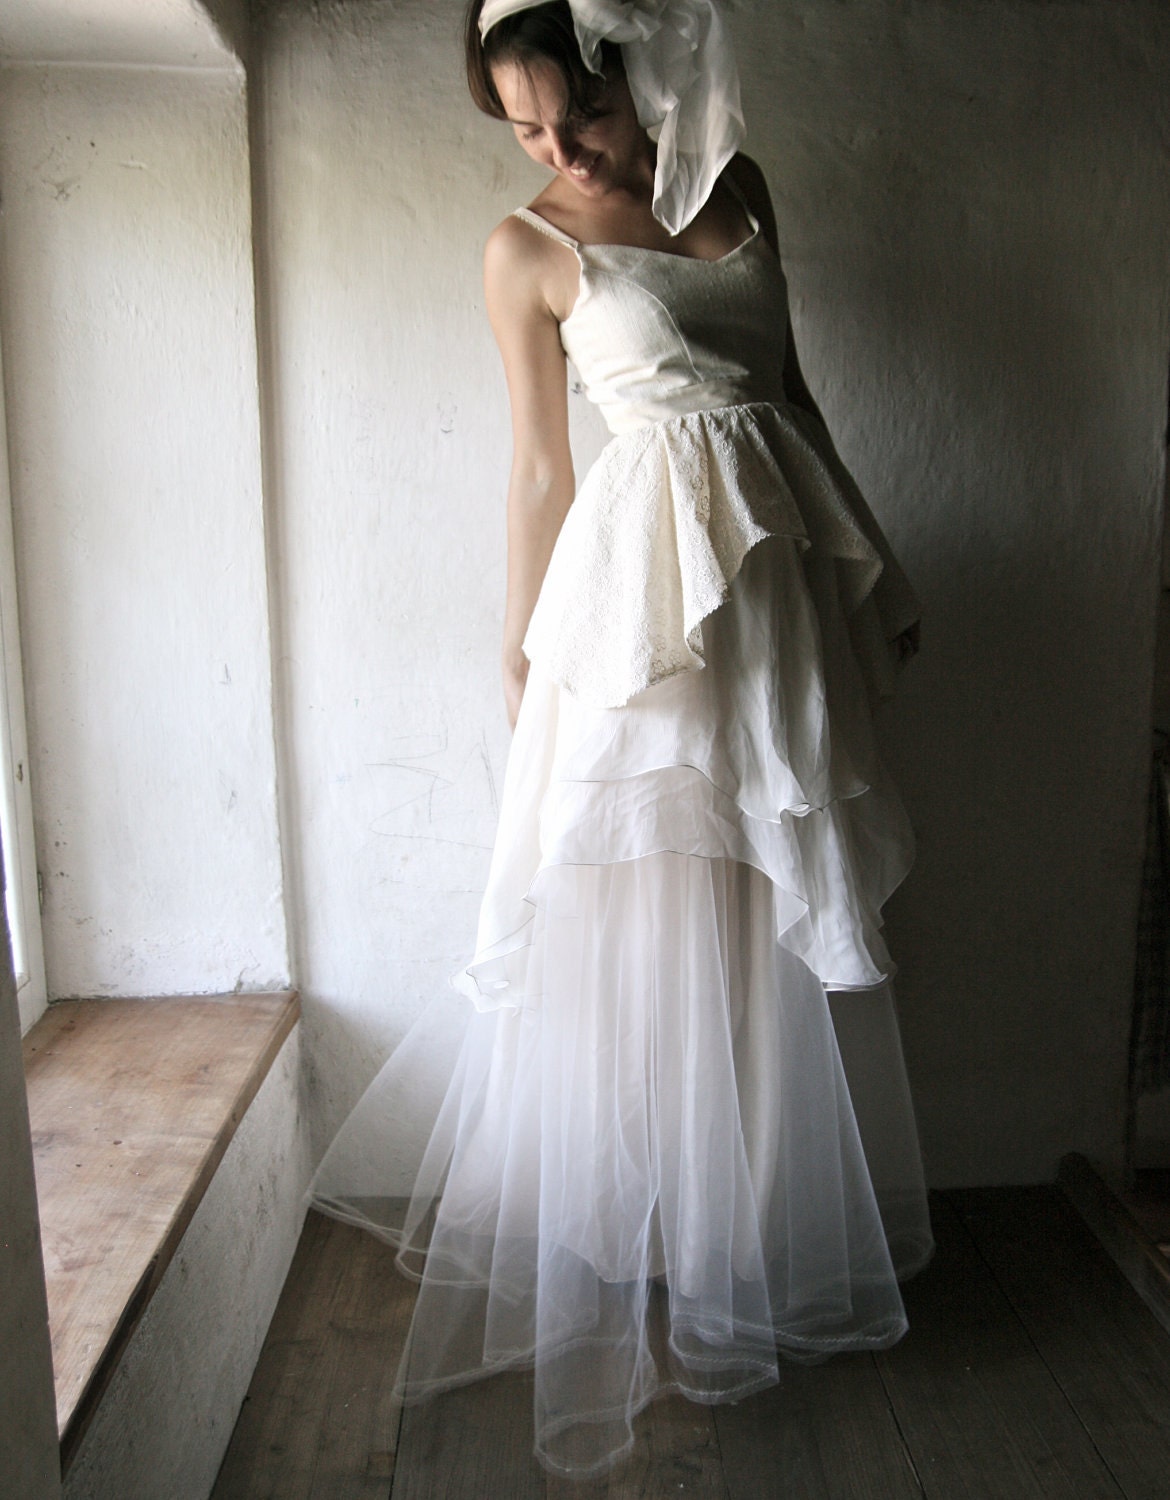 Wedding Dress - Bridal Gown ivory silk chiffon floor length couture handmade gown one of a kind - larimeloom